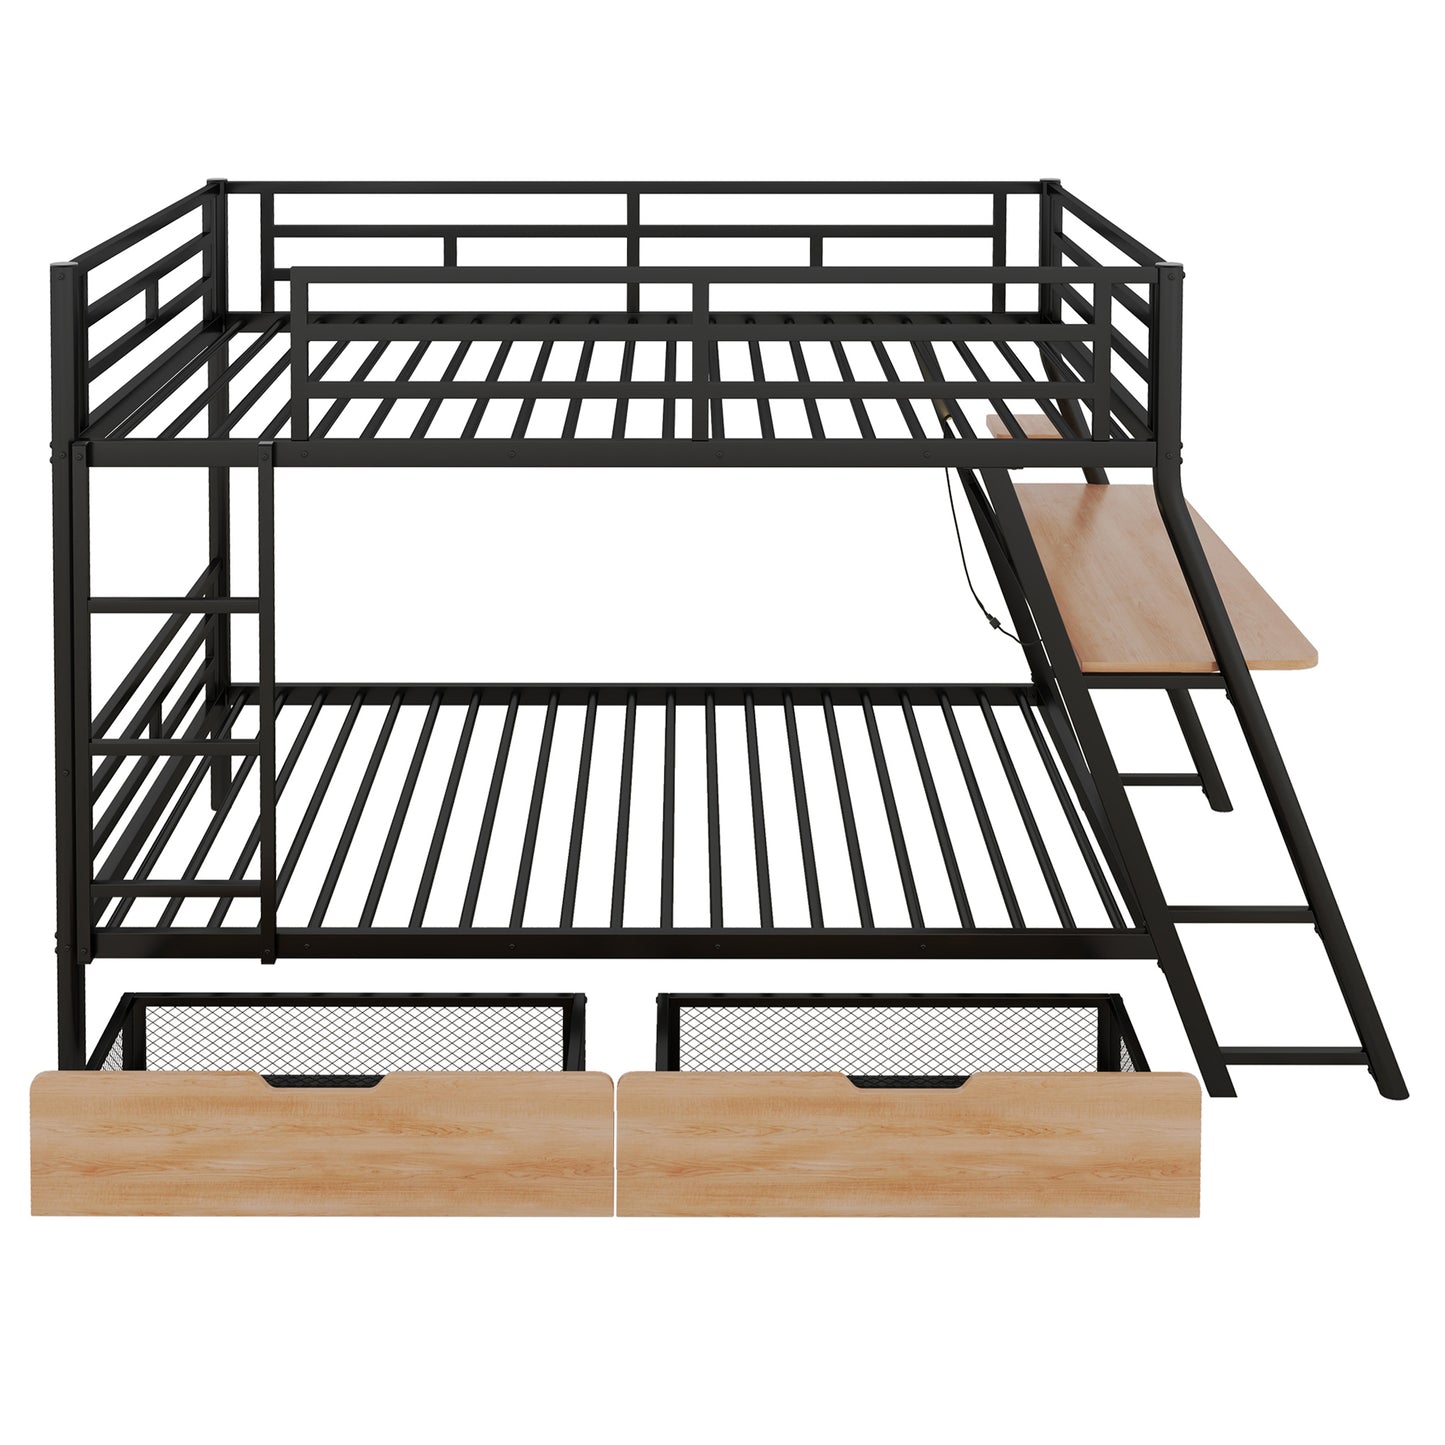 Full Size Metal Bunk Bed with Built-in Desk, Light and 2 Drawers, Black